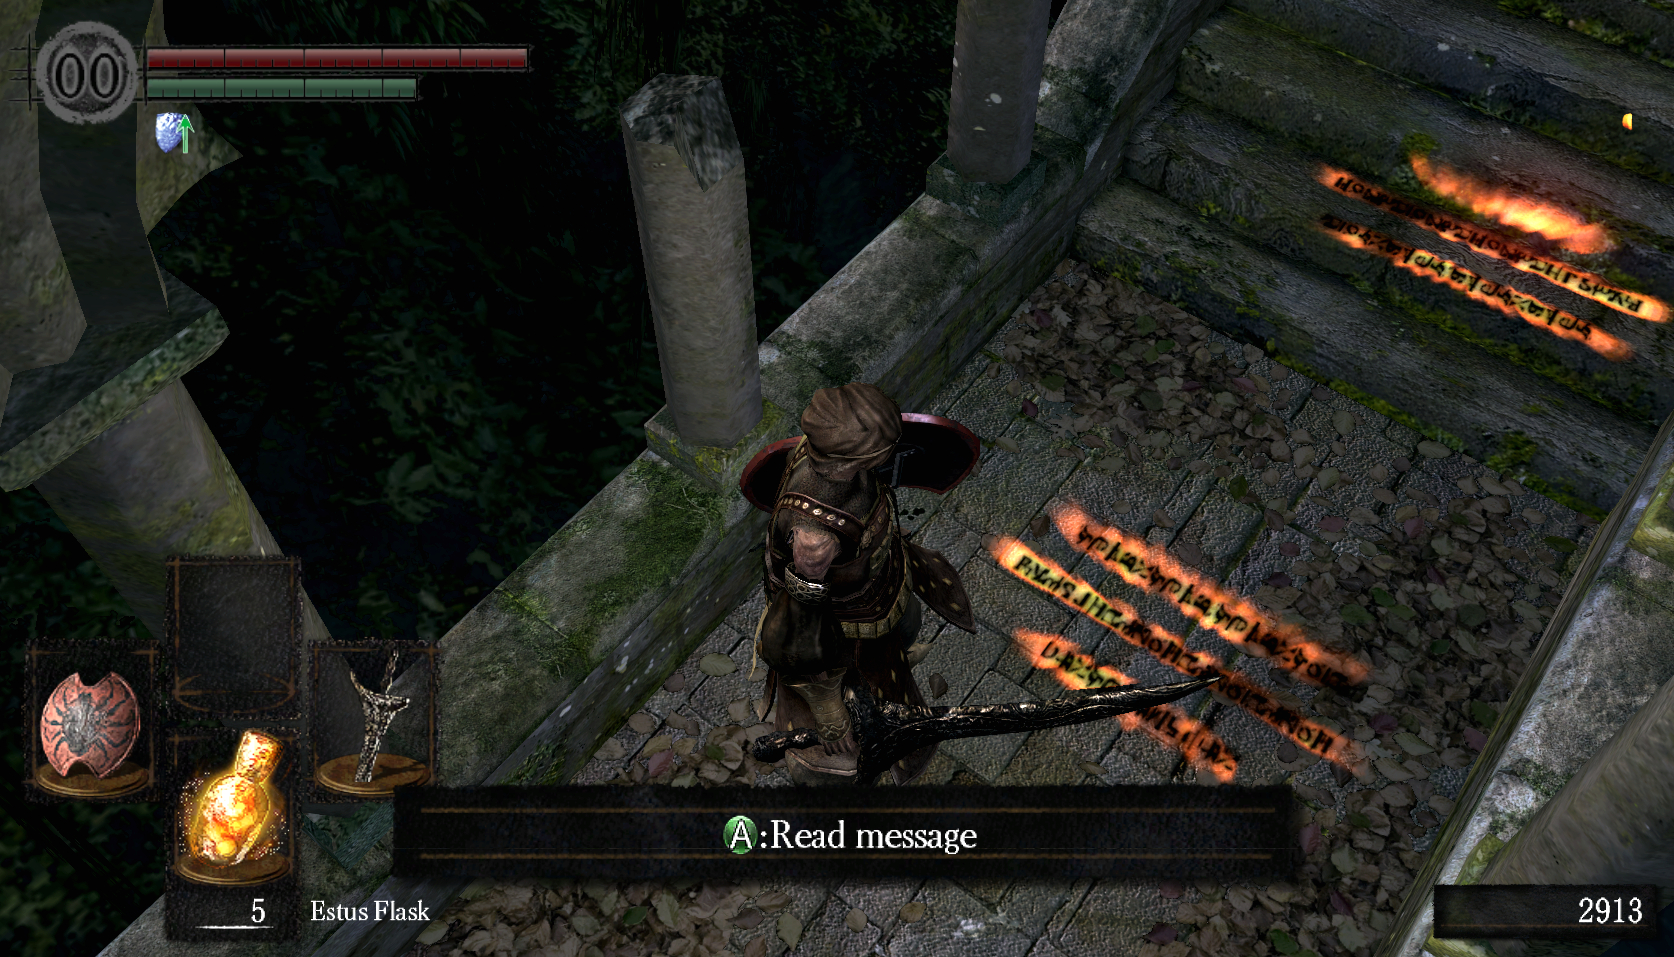 An armored character carrying a sword and shield stands in front of a set of glowing, runic text on a stone floor. Another similar set of glowing runes lies on a stairway in the upper right. The menu at the bottom of the screen depicts the A button, followed by the action "Read message."